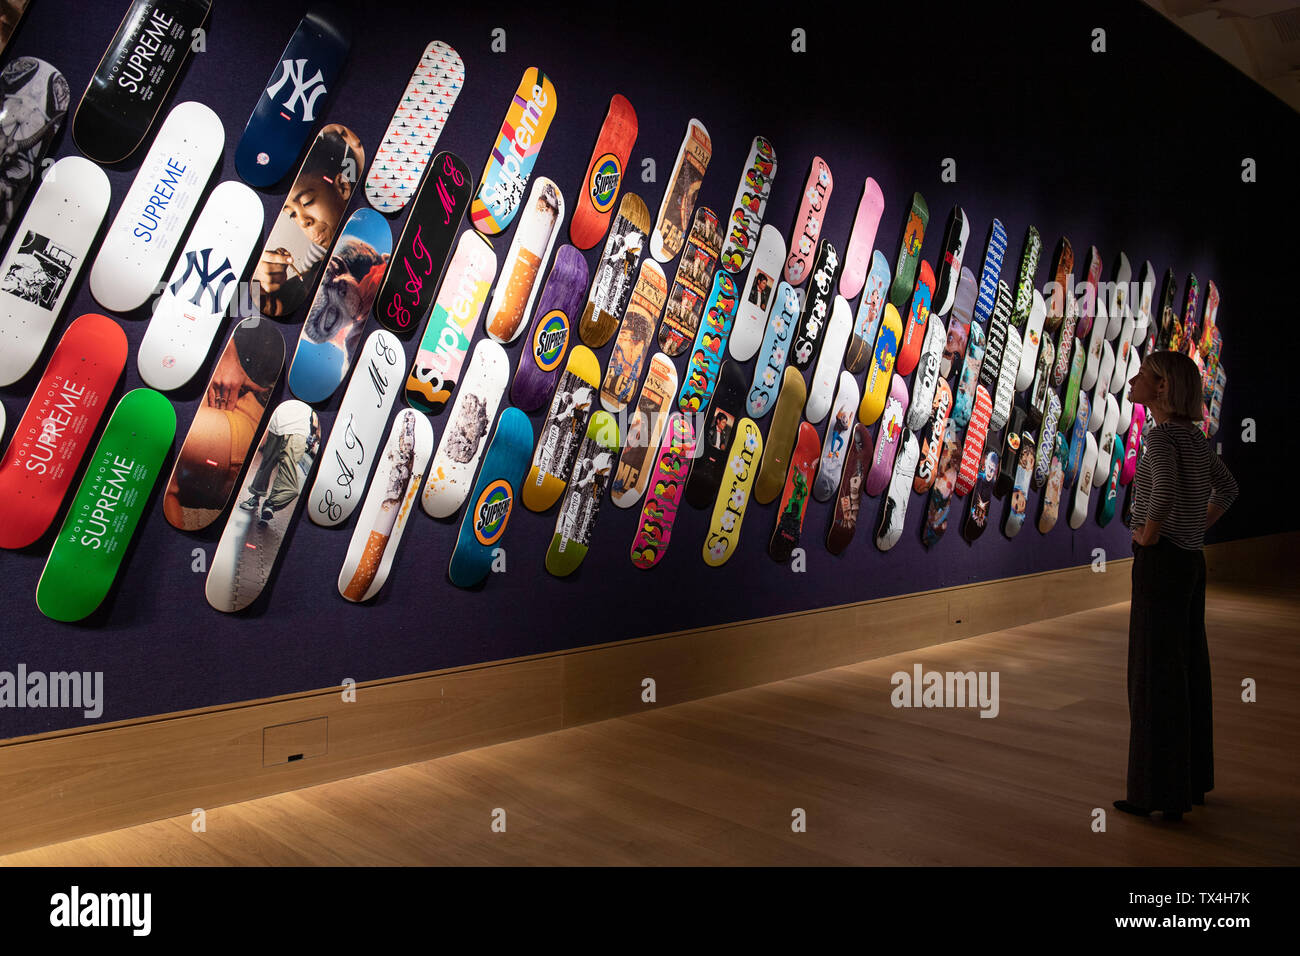 Bonhams, New Bond Street, London, UK. 24th June 2019. An extremely rare – and complete – collection of 131 Supreme full-sized Skateboard decks, produced by the streetwear brand Supreme New York, between 2011-2019, is on view before the Modern and Contemporary Art sale on 27th June 2019. The decks, being sold as a single lot, feature works by renowned contemporary artists such as The Chapman Brothers, Urs Fischer, Cindy Sherman, Nan Goldin and Mike Kelley. The collection has an estimate of £100,000-150,000. Credit: Malcolm Park/Alamy Live News. Stock Photo